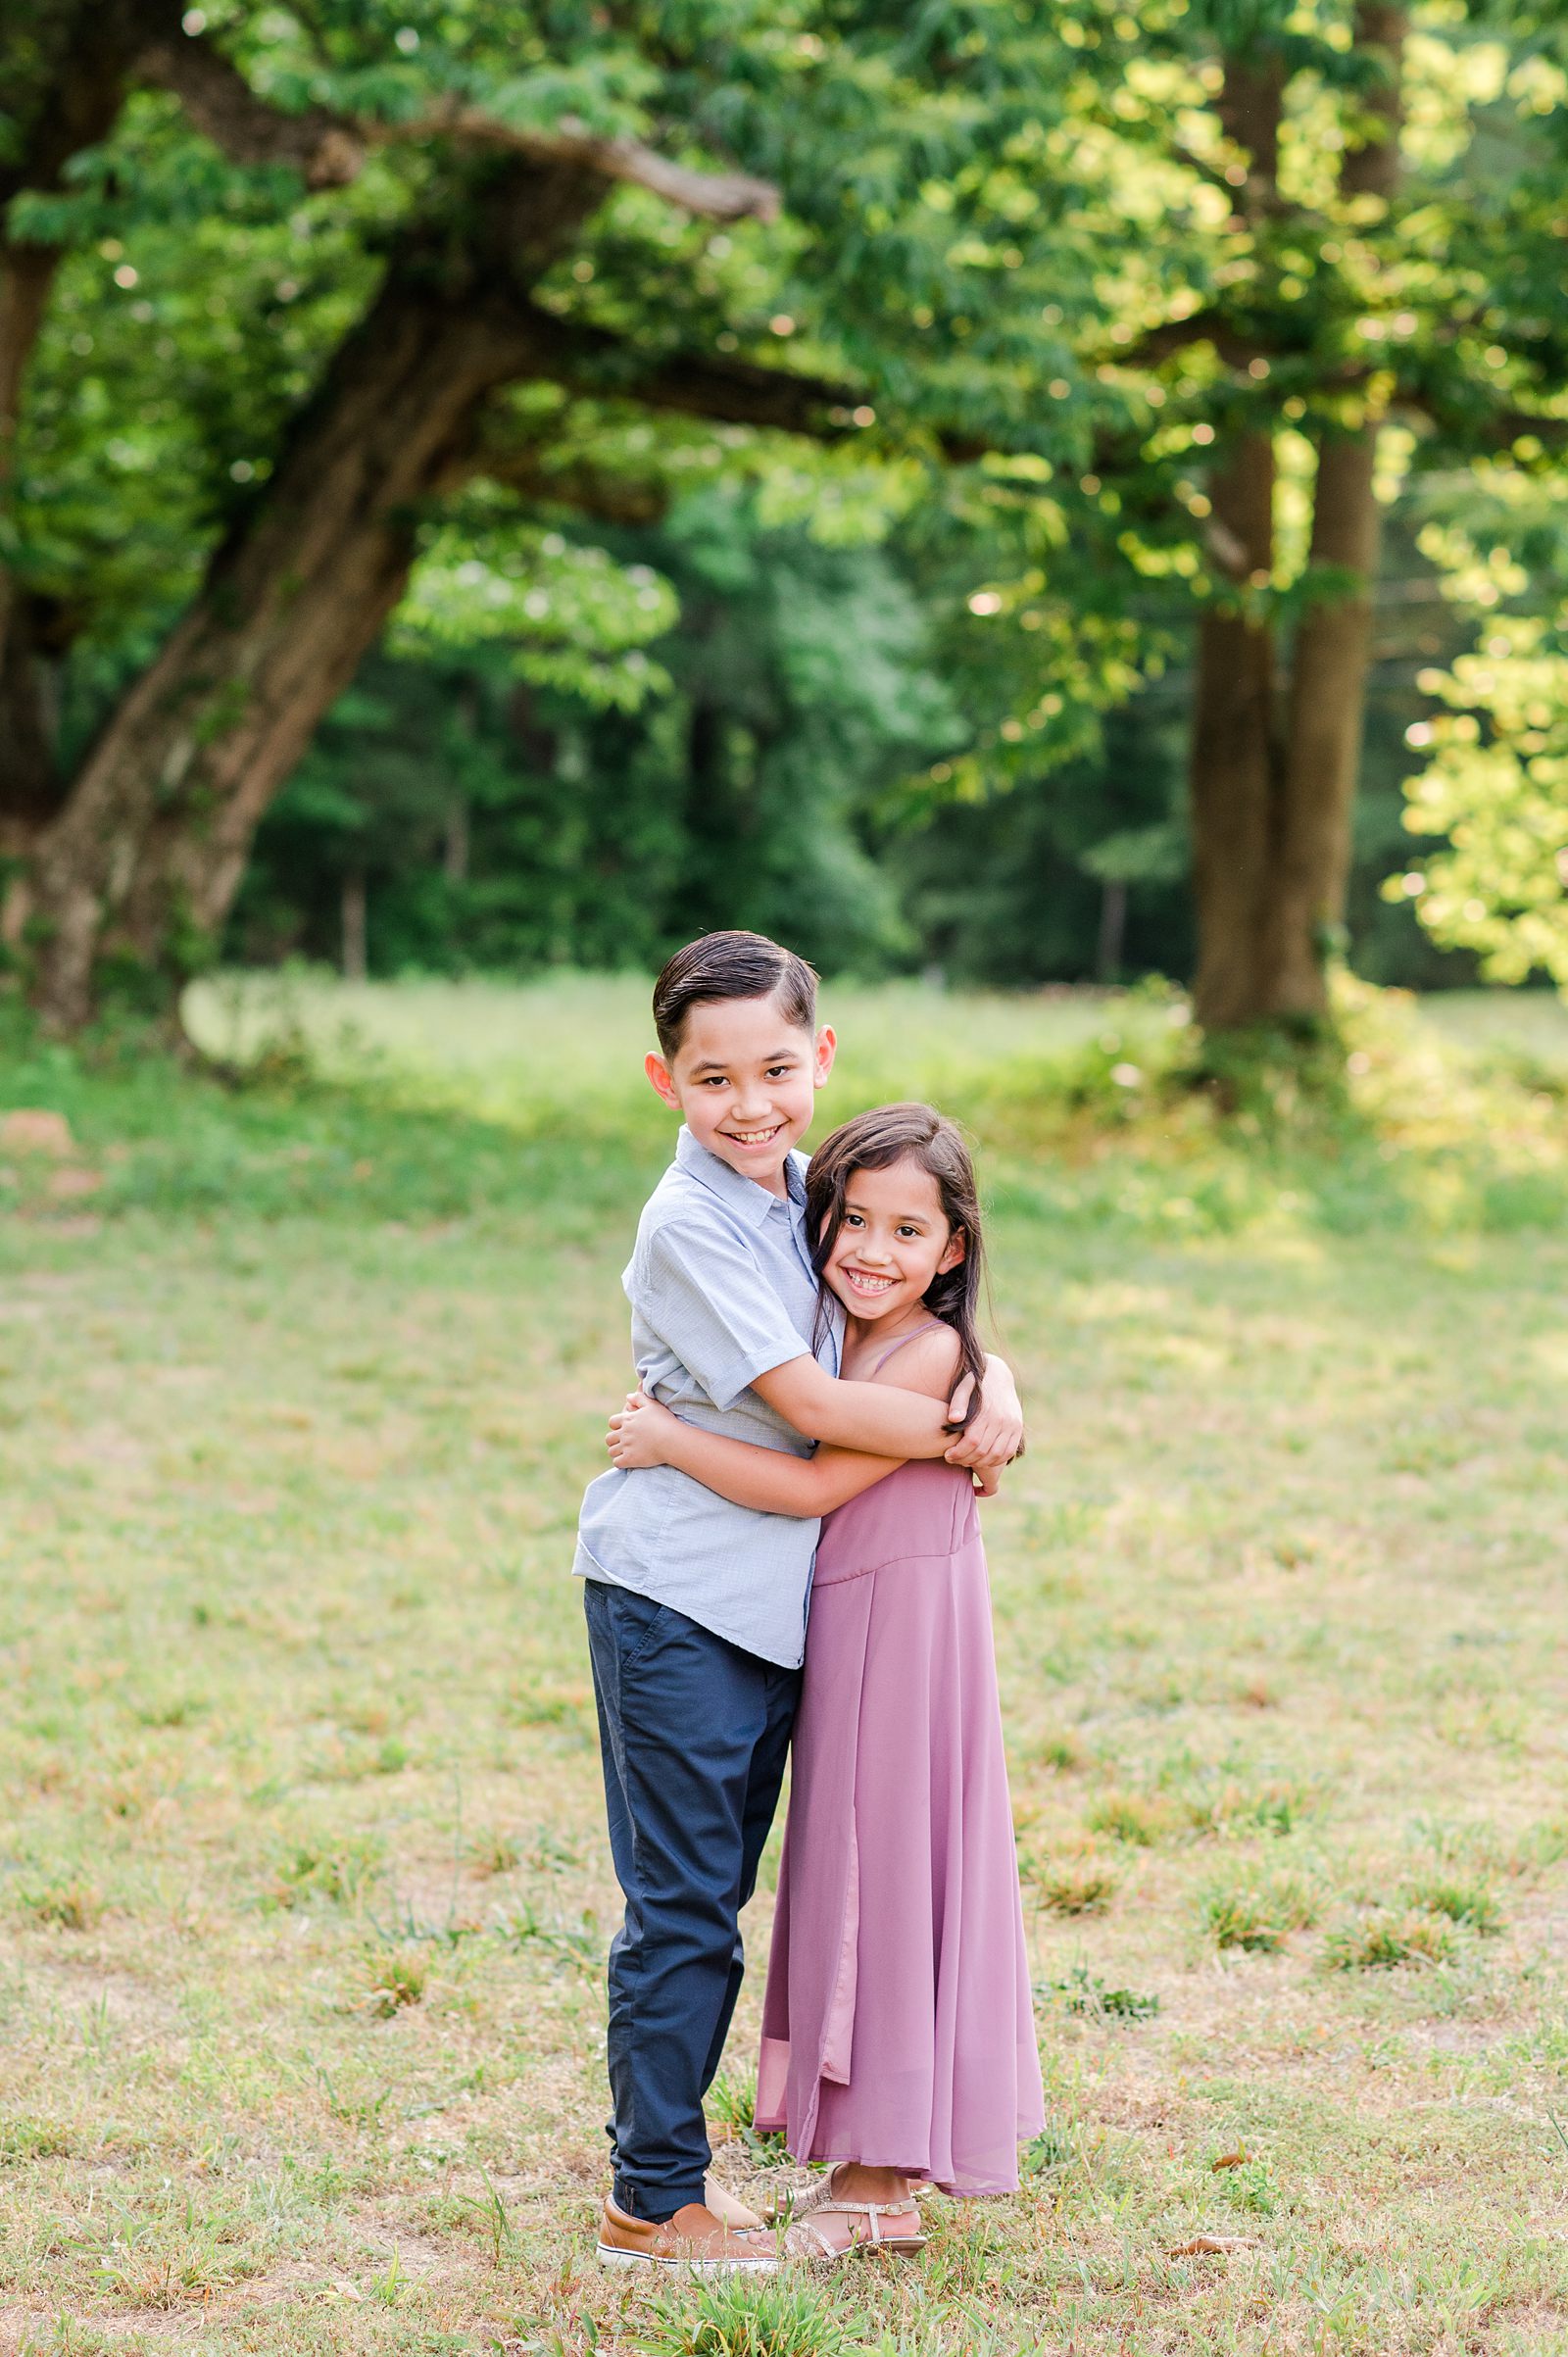 2020 Richmond Spring Family Mini Sessions at Rural Plains Park with Richmond Family Photographer Kailey Brianne Photography. 